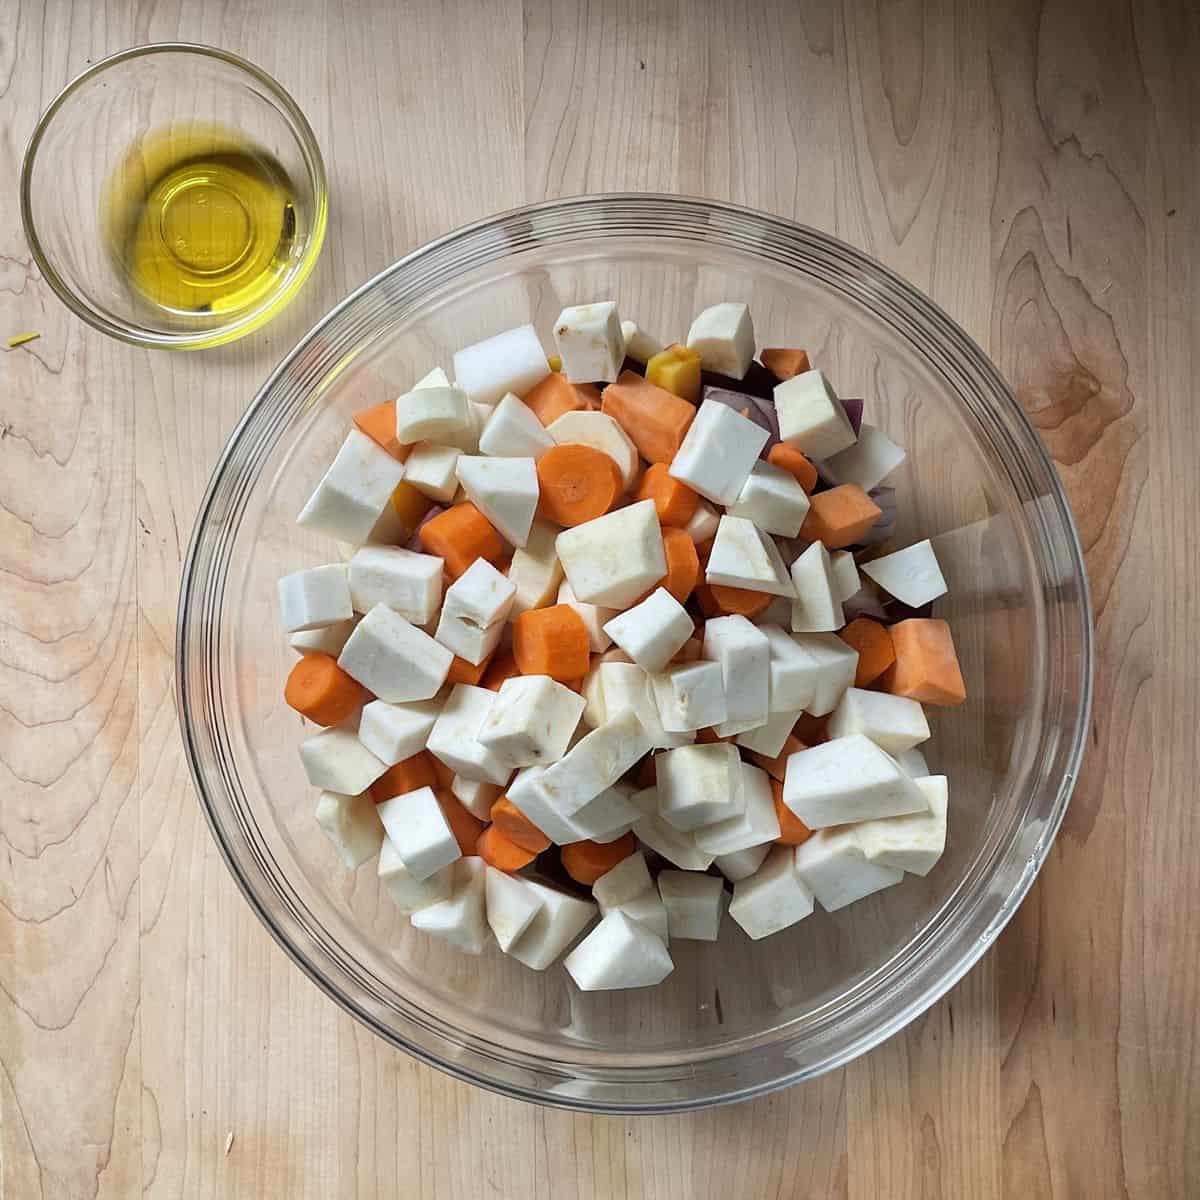 Chopped root vegetables in a bowl.